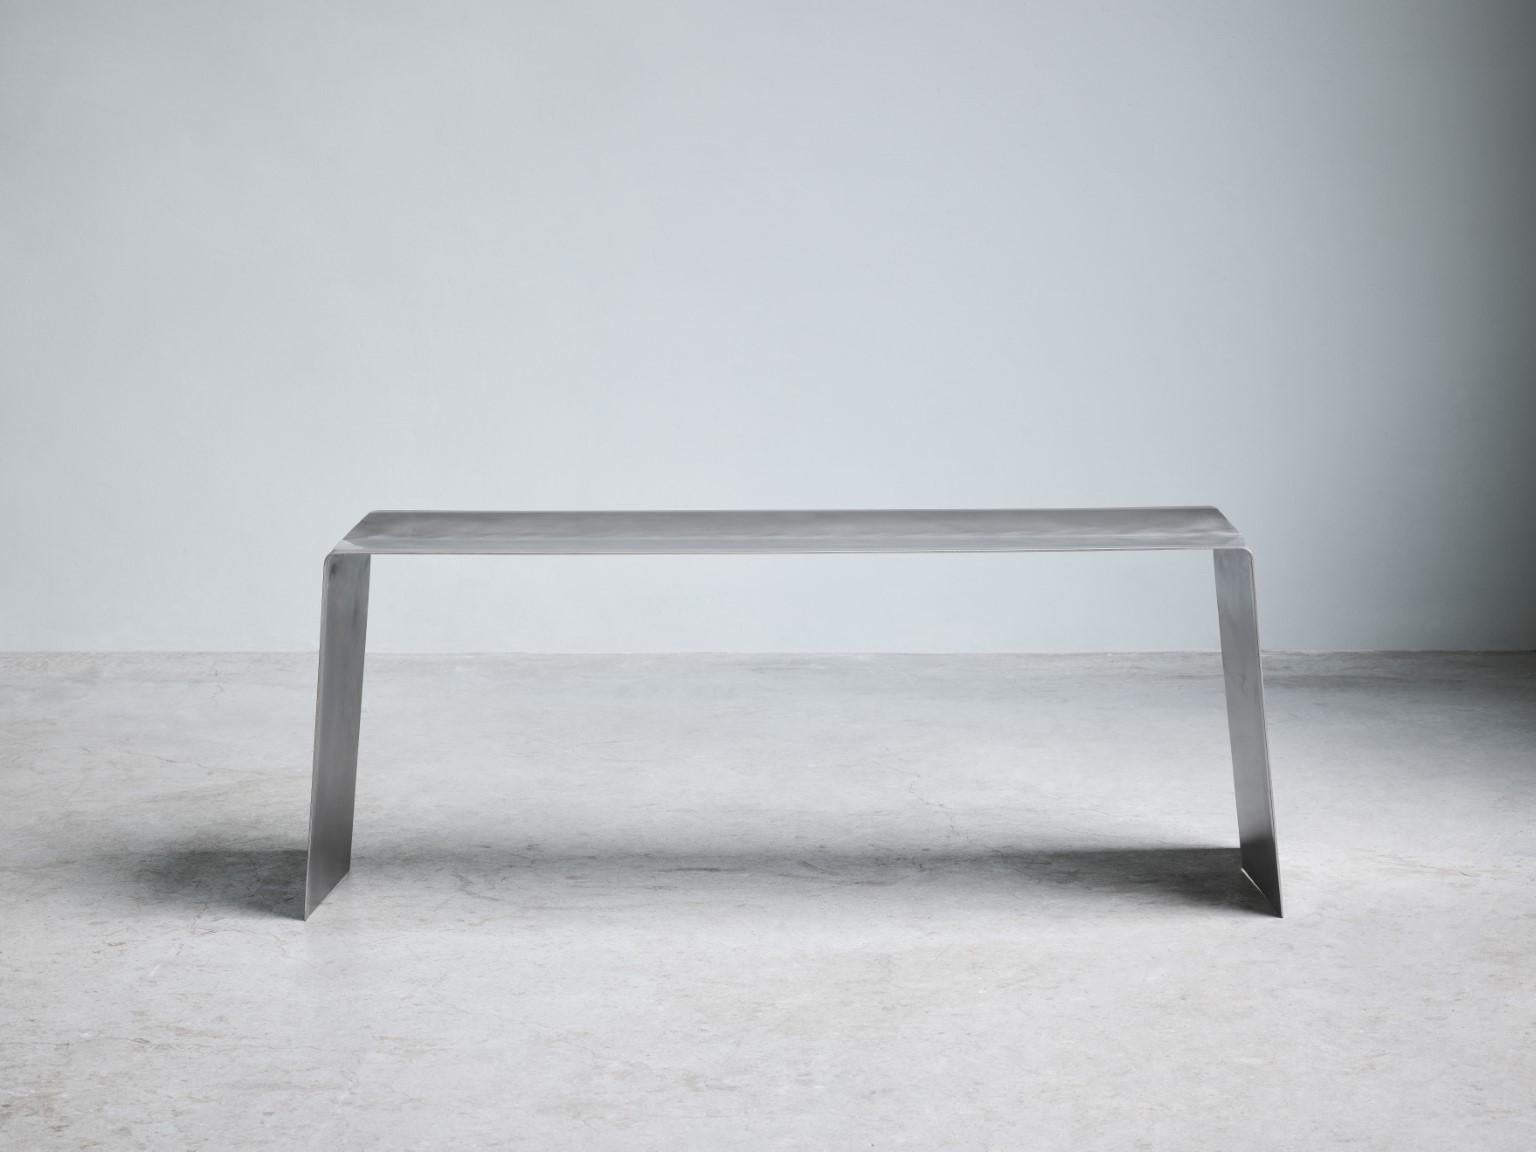 Dutch Set of Camber Stool and Bench by Paul Coenen